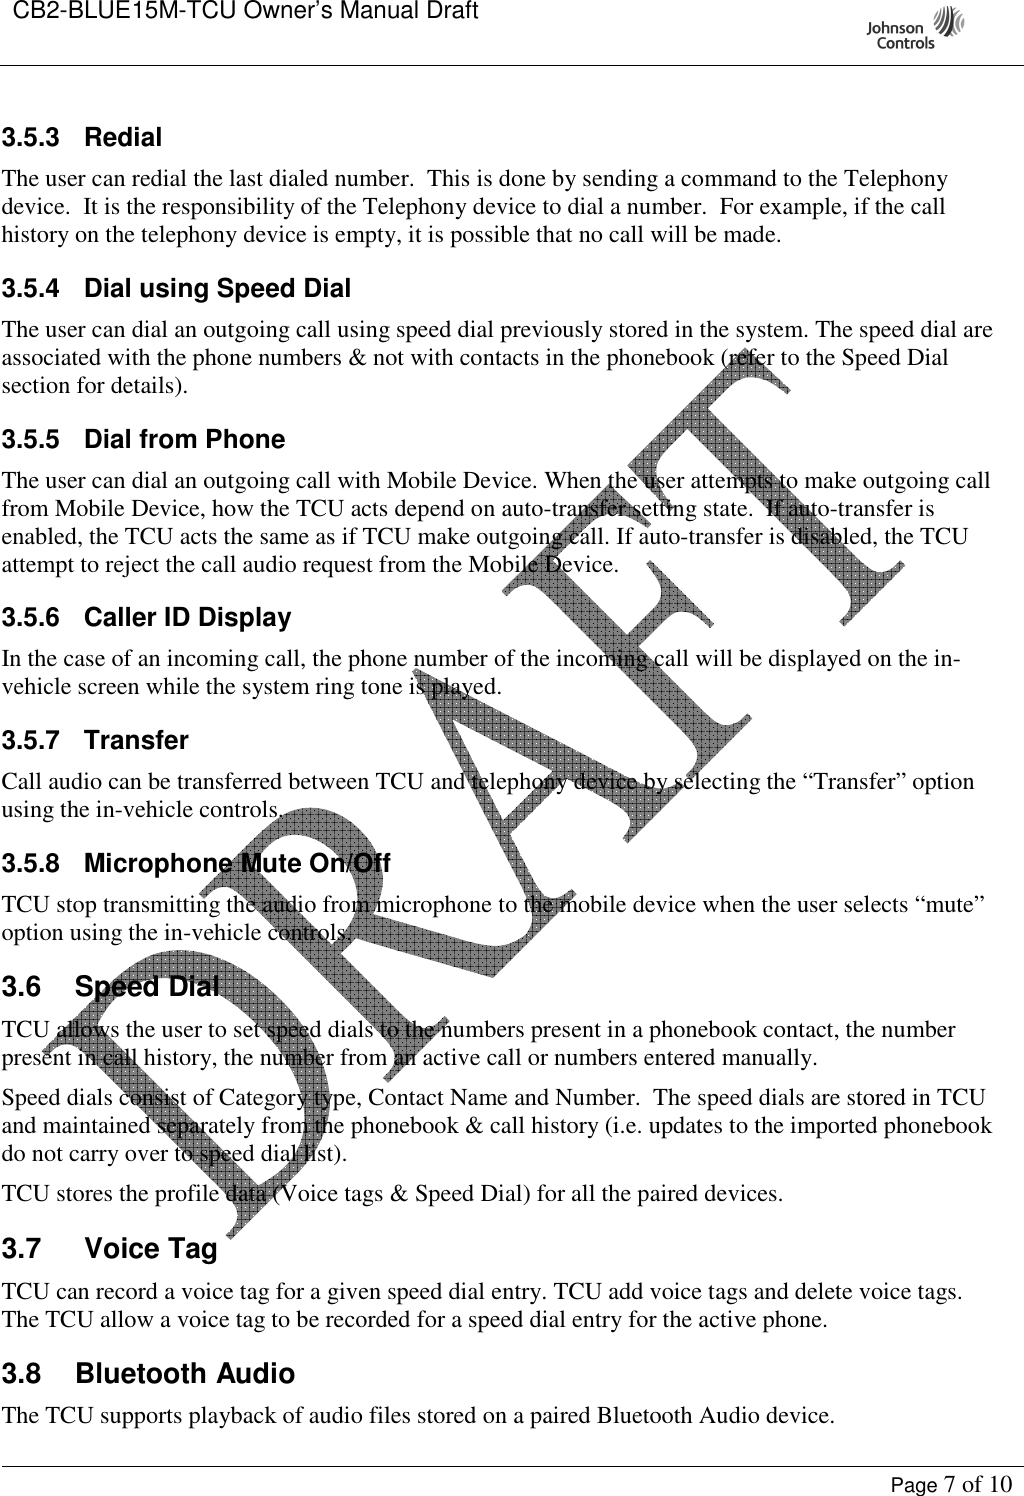 CB2-BLUE15M-TCU Owner’s Manual Draft     Page 7 of 10  3.5.3  Redial The user can redial the last dialed number.  This is done by sending a command to the Telephony device.  It is the responsibility of the Telephony device to dial a number.  For example, if the call history on the telephony device is empty, it is possible that no call will be made. 3.5.4  Dial using Speed Dial The user can dial an outgoing call using speed dial previously stored in the system. The speed dial are associated with the phone numbers &amp; not with contacts in the phonebook (refer to the Speed Dial section for details). 3.5.5  Dial from Phone The user can dial an outgoing call with Mobile Device. When the user attempts to make outgoing call from Mobile Device, how the TCU acts depend on auto-transfer setting state.  If auto-transfer is enabled, the TCU acts the same as if TCU make outgoing call. If auto-transfer is disabled, the TCU attempt to reject the call audio request from the Mobile Device. 3.5.6  Caller ID Display In the case of an incoming call, the phone number of the incoming call will be displayed on the in-vehicle screen while the system ring tone is played. 3.5.7  Transfer Call audio can be transferred between TCU and telephony device by selecting the “Transfer” option using the in-vehicle controls. 3.5.8  Microphone Mute On/Off TCU stop transmitting the audio from microphone to the mobile device when the user selects “mute” option using the in-vehicle controls. 3.6  Speed Dial TCU allows the user to set speed dials to the numbers present in a phonebook contact, the number present in call history, the number from an active call or numbers entered manually. Speed dials consist of Category type, Contact Name and Number.  The speed dials are stored in TCU and maintained separately from the phonebook &amp; call history (i.e. updates to the imported phonebook do not carry over to speed dial list). TCU stores the profile data (Voice tags &amp; Speed Dial) for all the paired devices.   3.7  Voice Tag TCU can record a voice tag for a given speed dial entry. TCU add voice tags and delete voice tags. The TCU allow a voice tag to be recorded for a speed dial entry for the active phone. 3.8  Bluetooth Audio The TCU supports playback of audio files stored on a paired Bluetooth Audio device.   